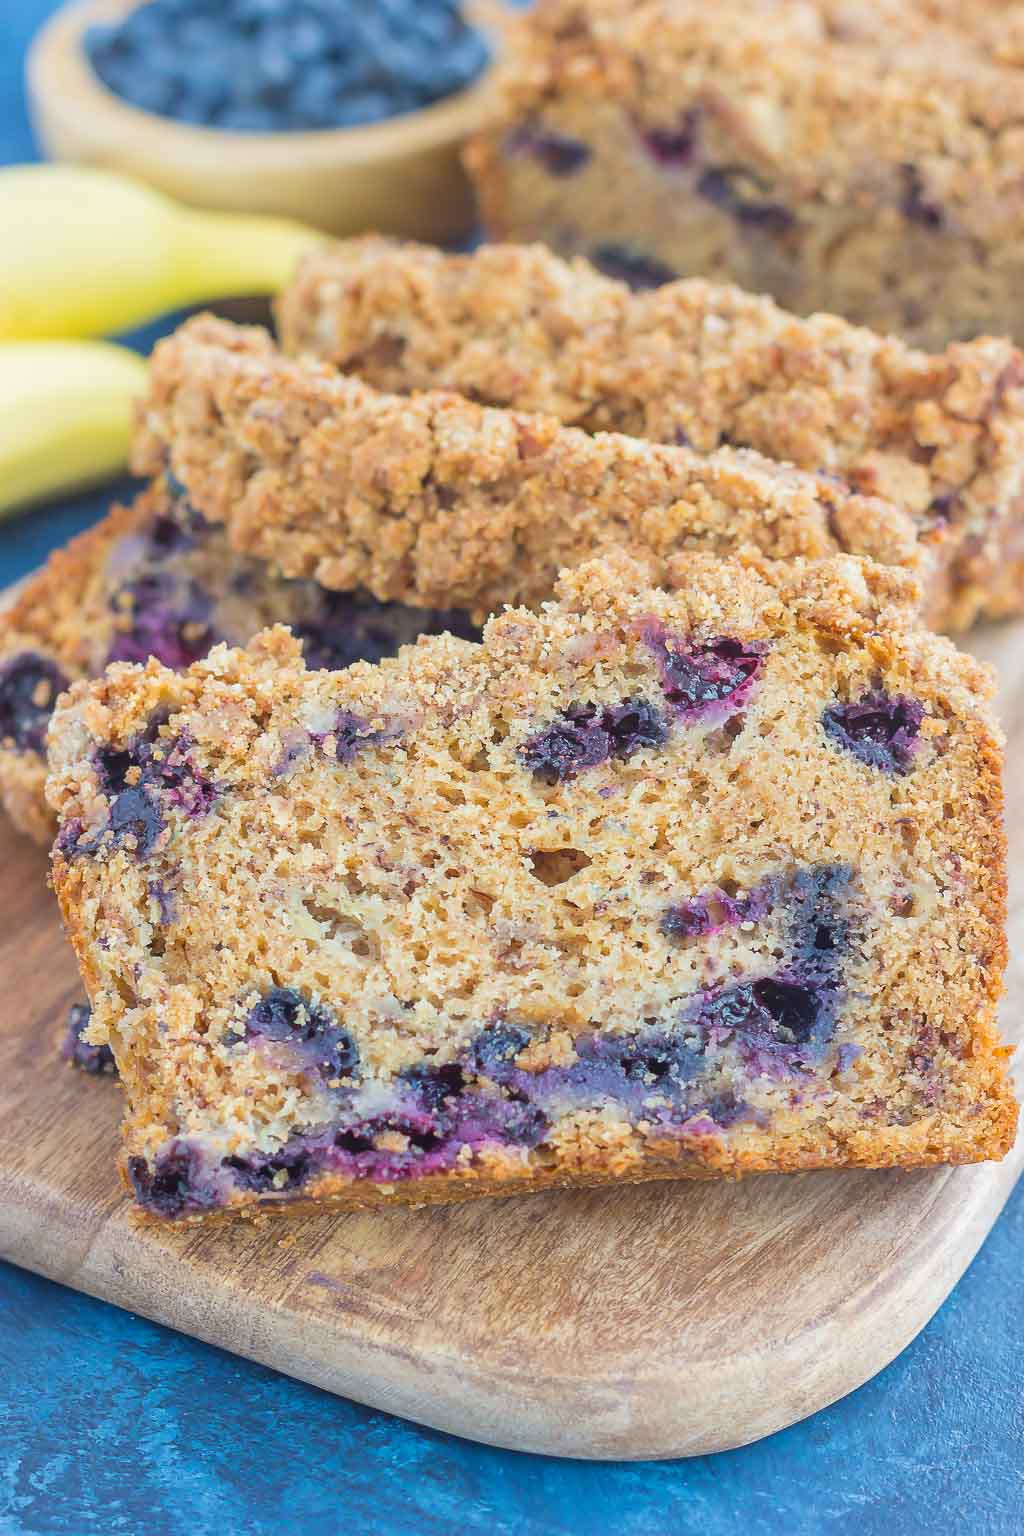 This Cinnamon Streusel Blueberry Banana Bread is packed with the classic banana bread flavor, loaded with juicy blueberries, and topped with a sweet and crumbly cinnamon streusel. Soft, moist, and perfectly delicious, this quick bread makes the best breakfast or dessert!